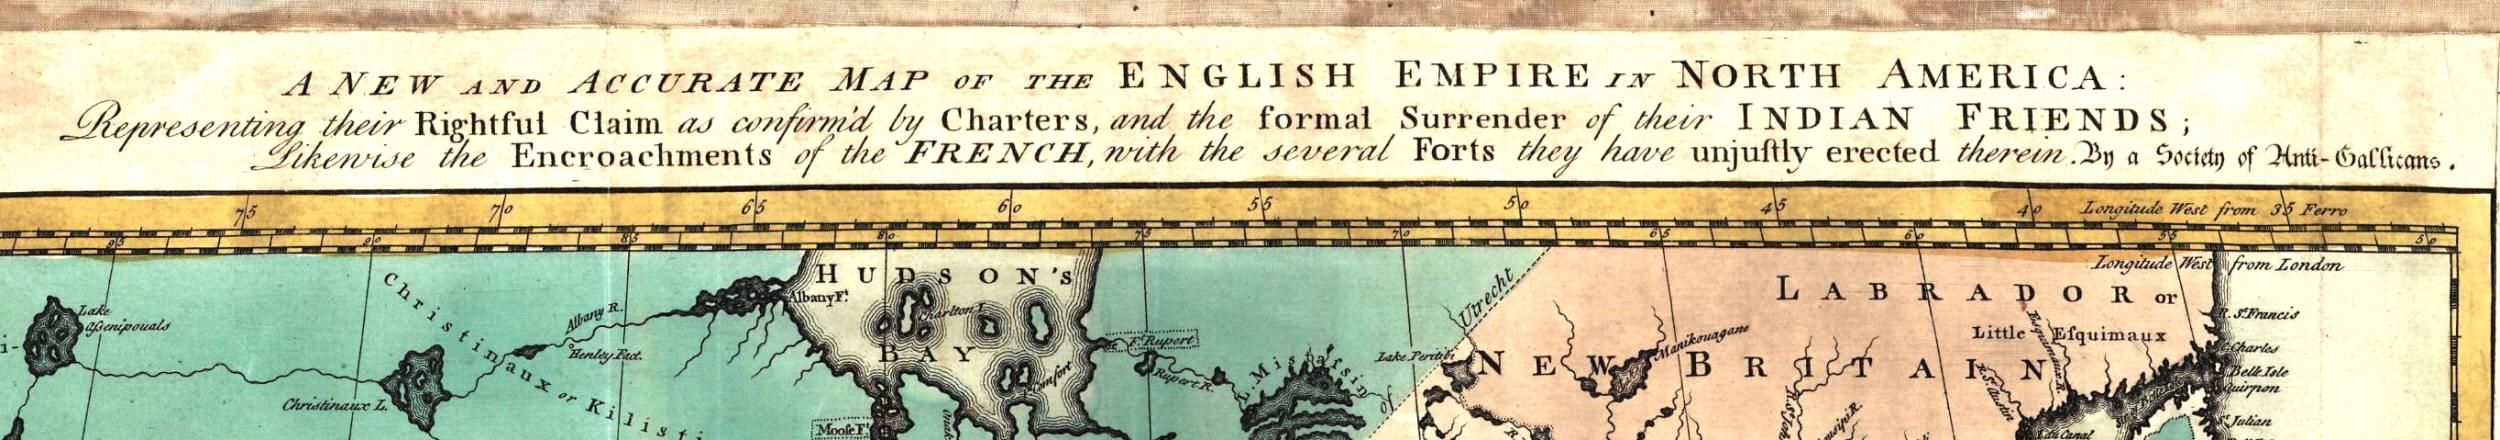 Title of 1755 map of the English Empire in North America